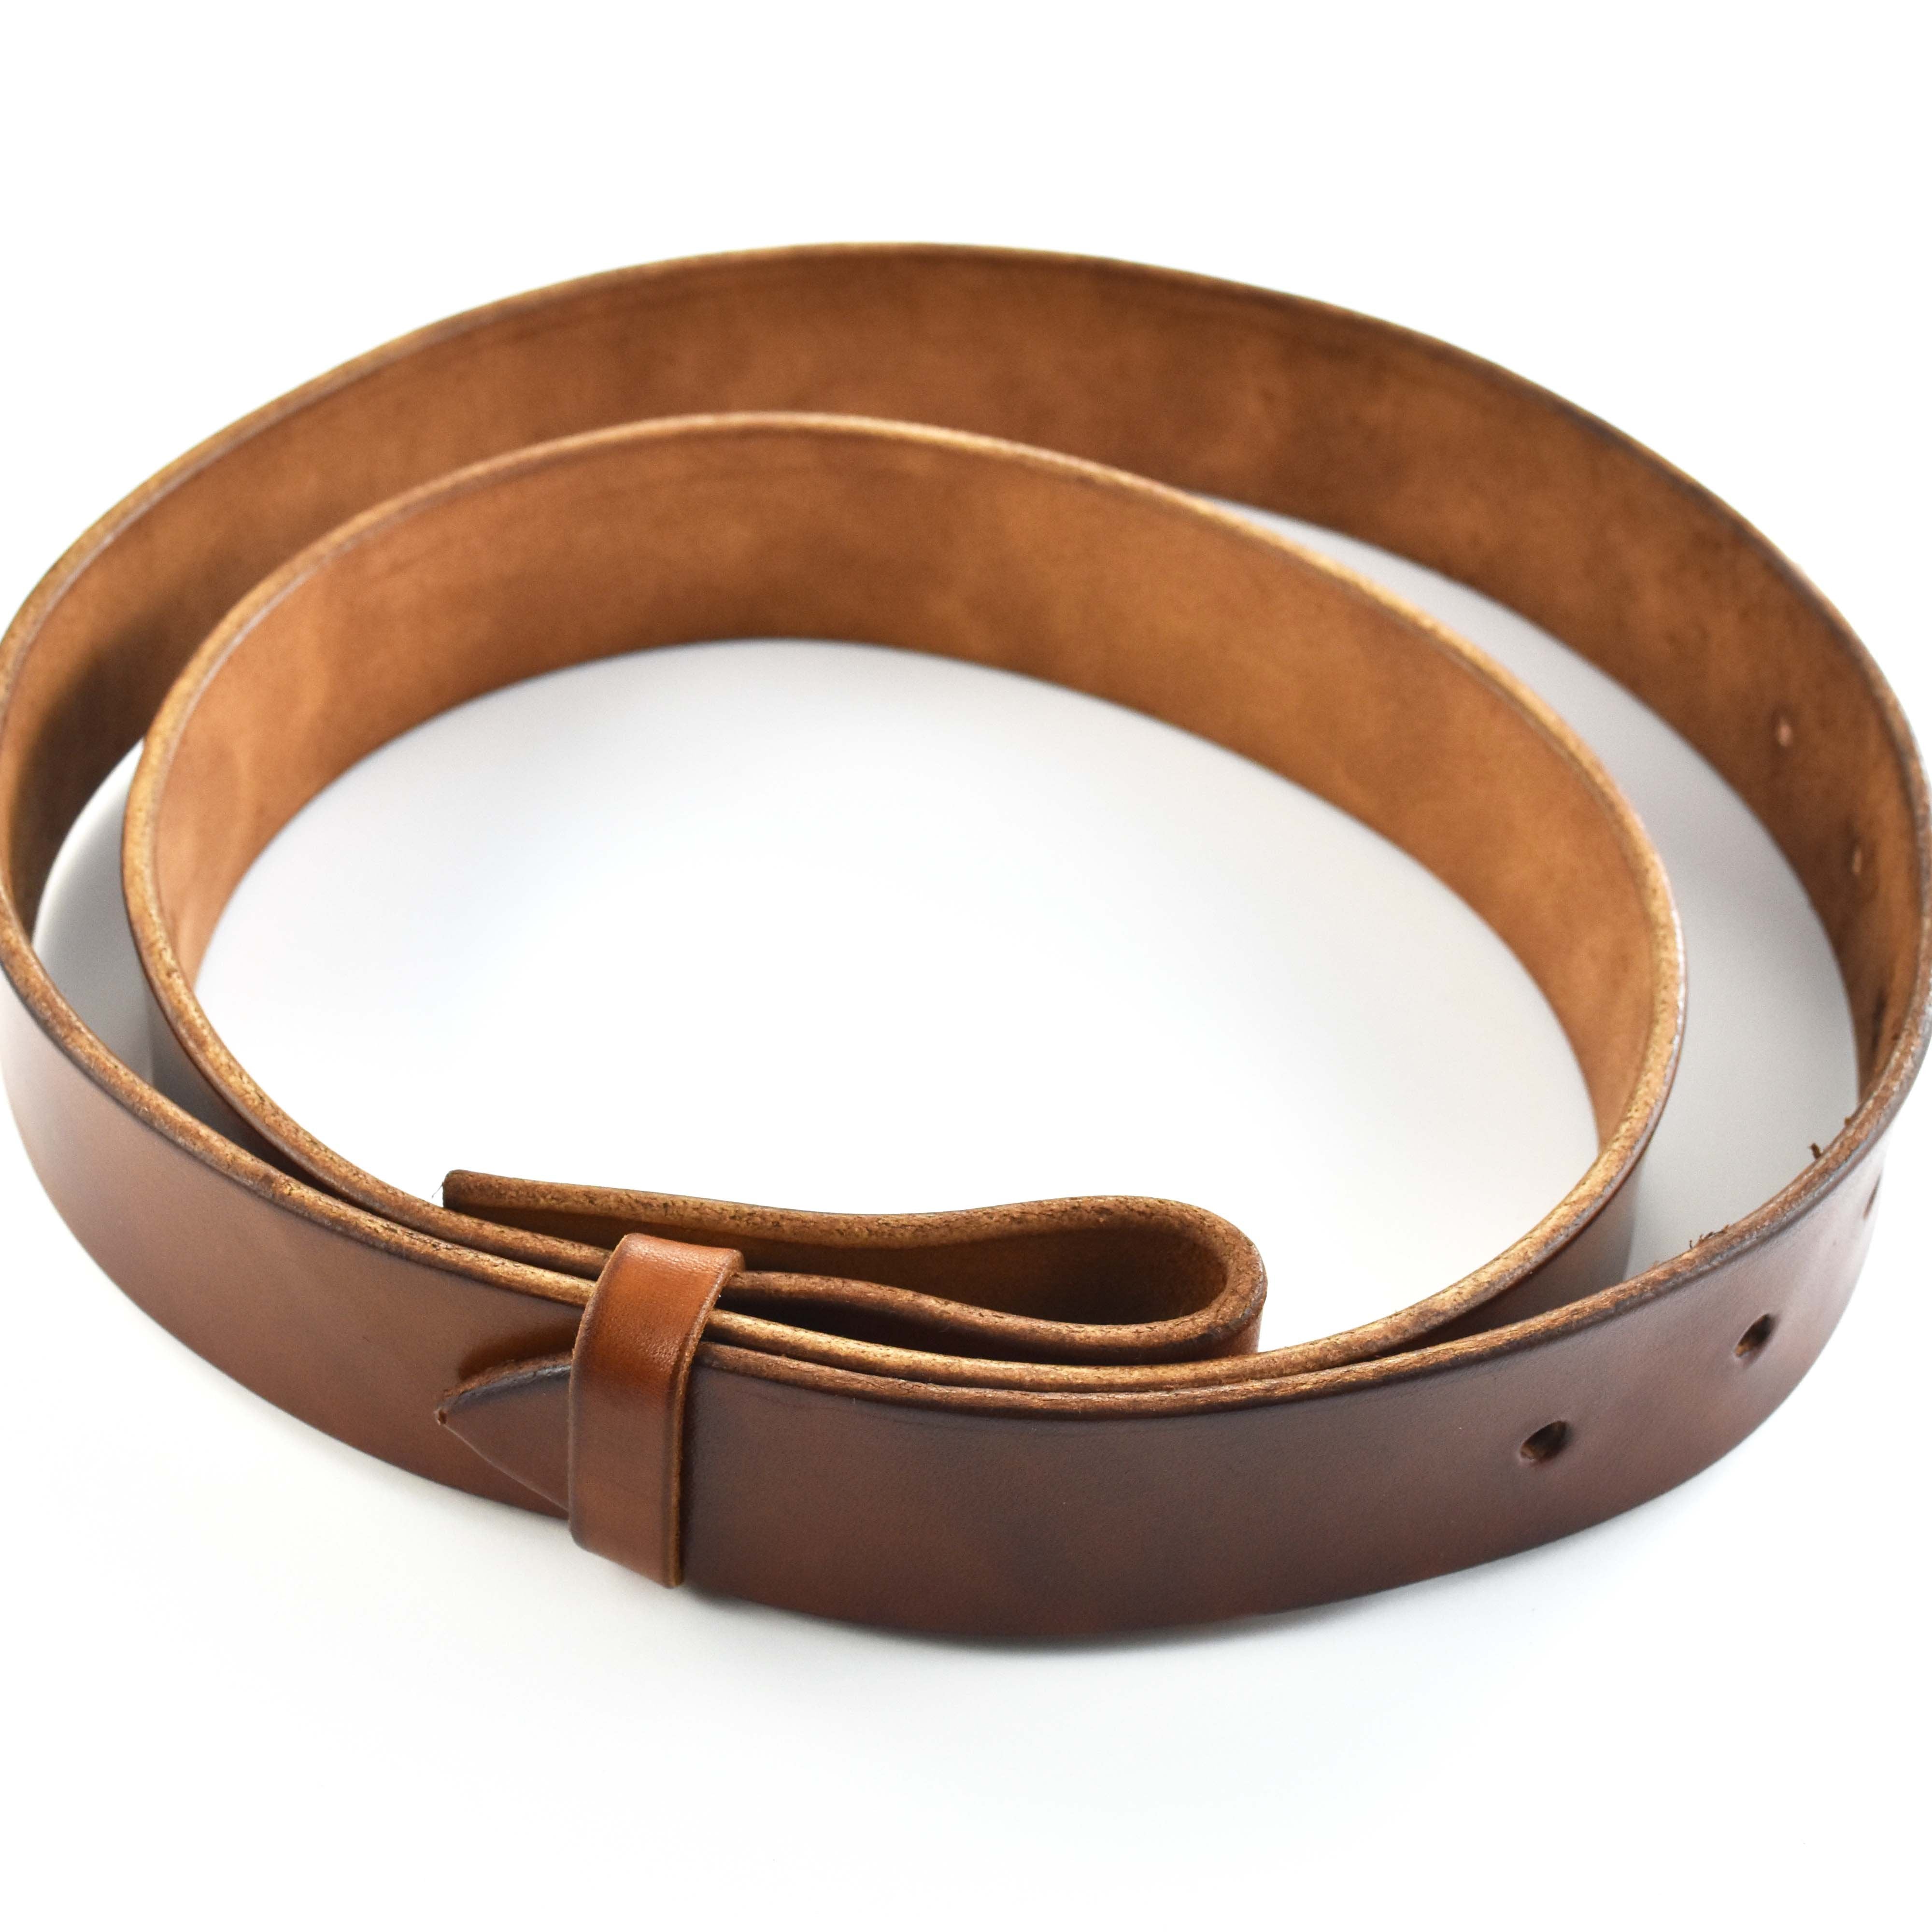 Handcrafted Leather Belt (S, M, L, XL) - Tree Planted with Purchase - Artisan Goods Small Medium 4137 - handmade by Beth Millner Jewelry